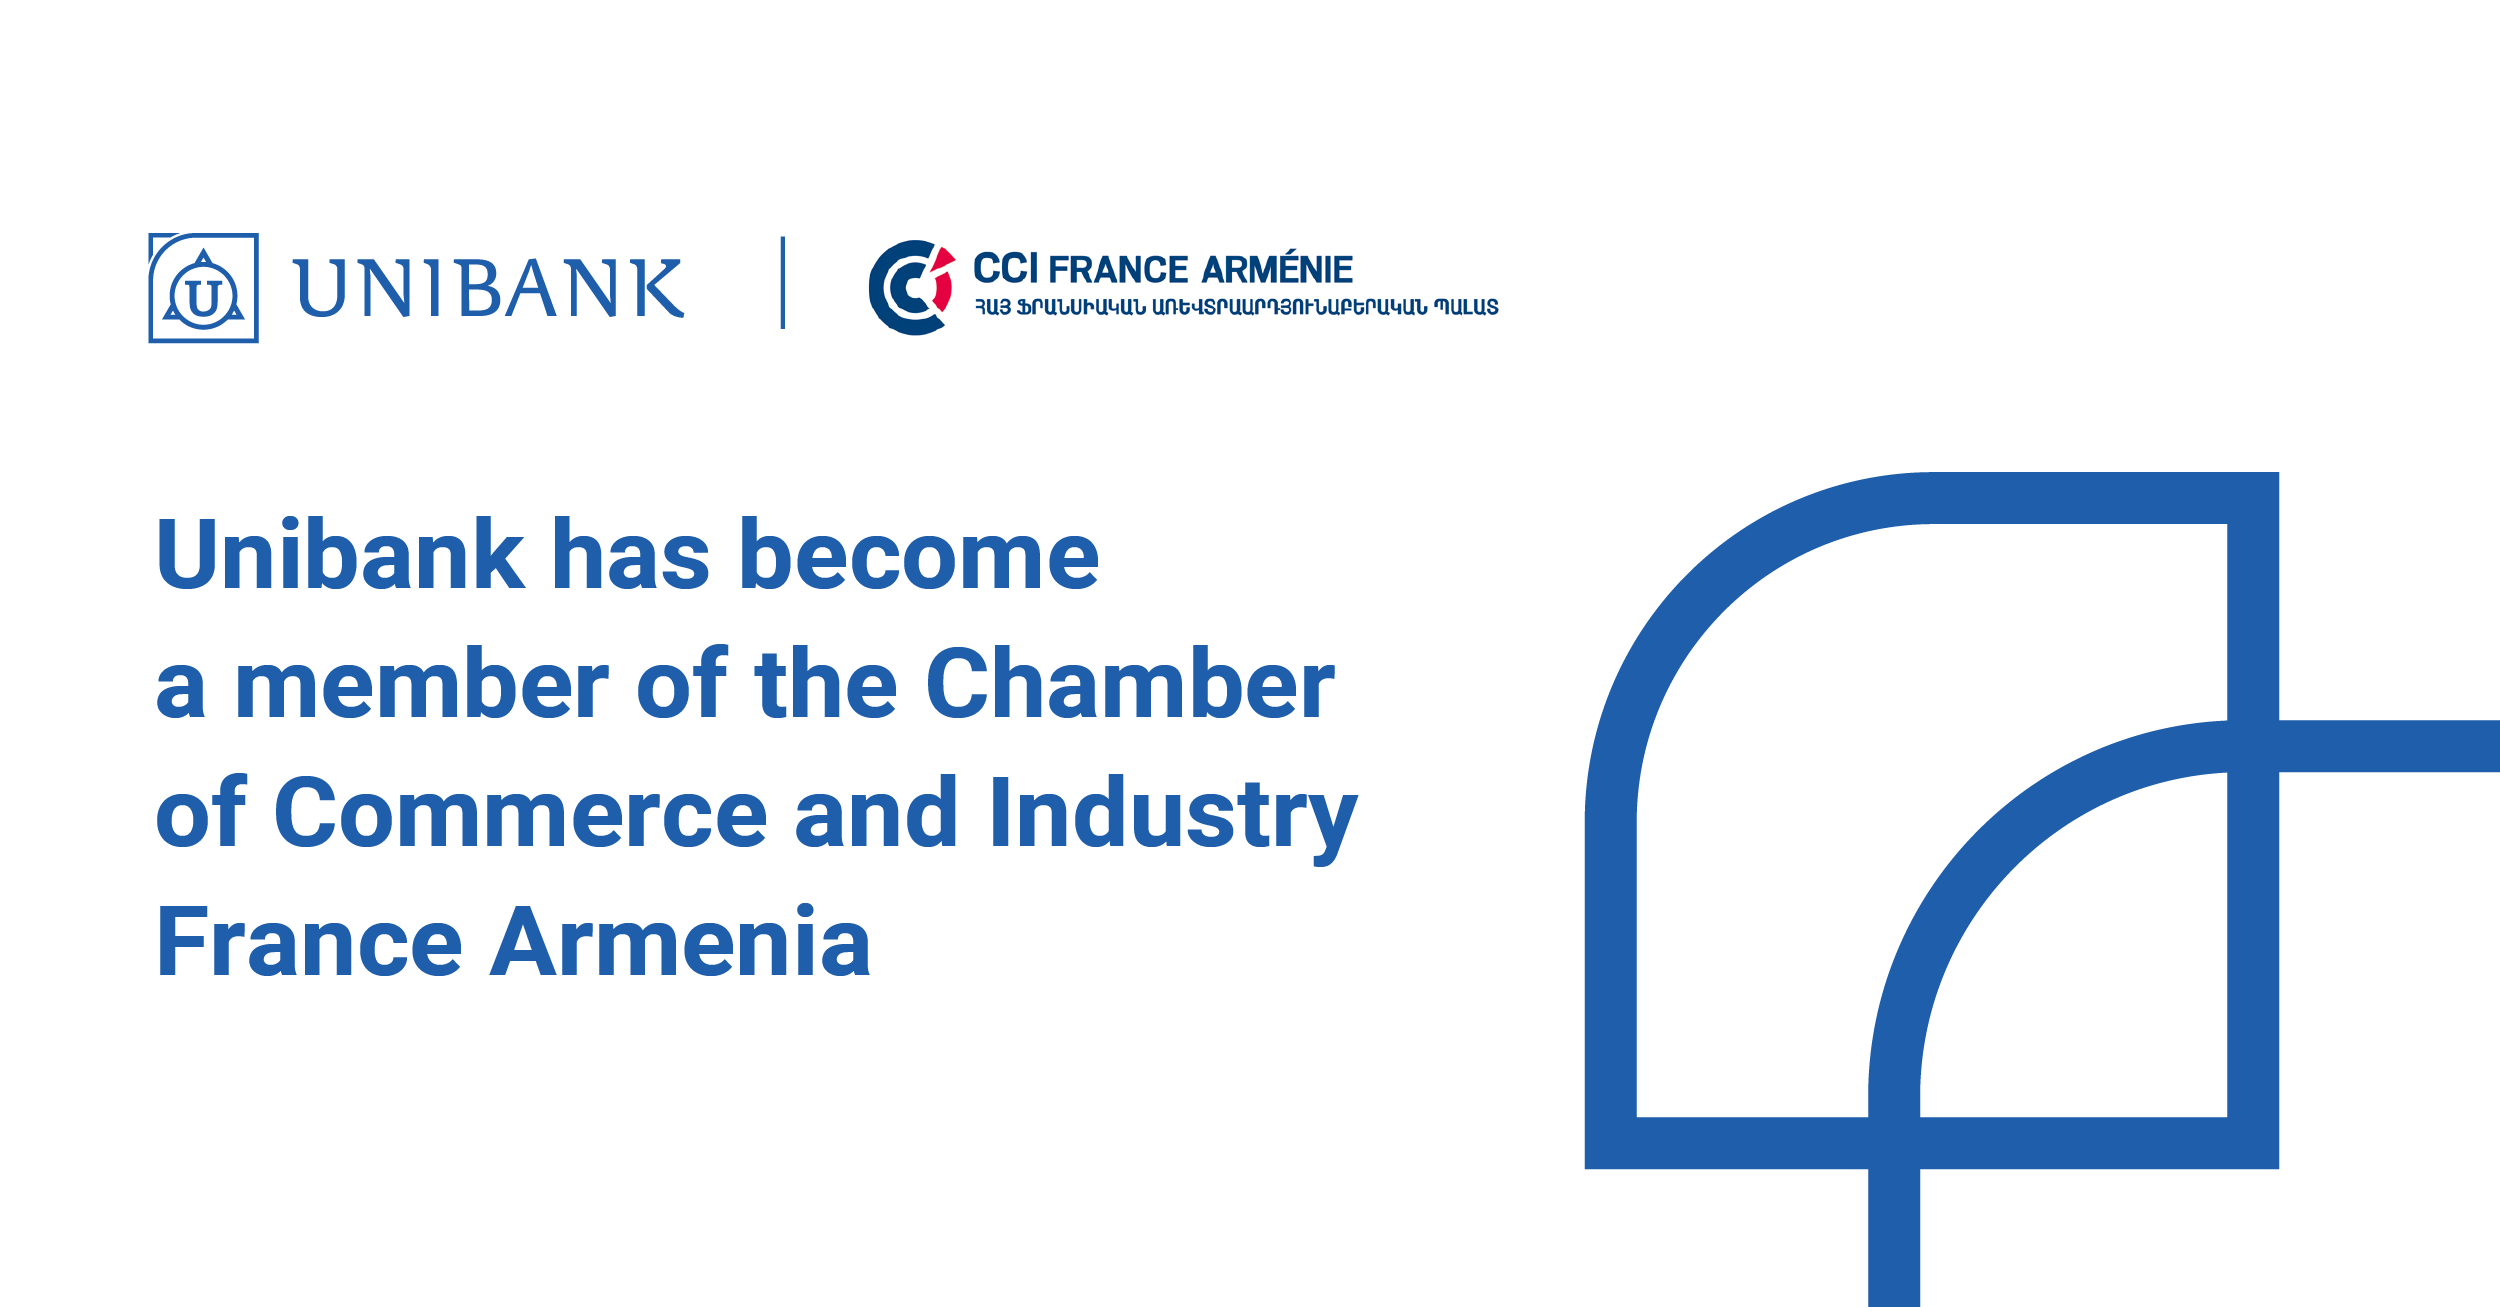 Unibank has become a member of the Chamber of Commerce and Industry France Armenia